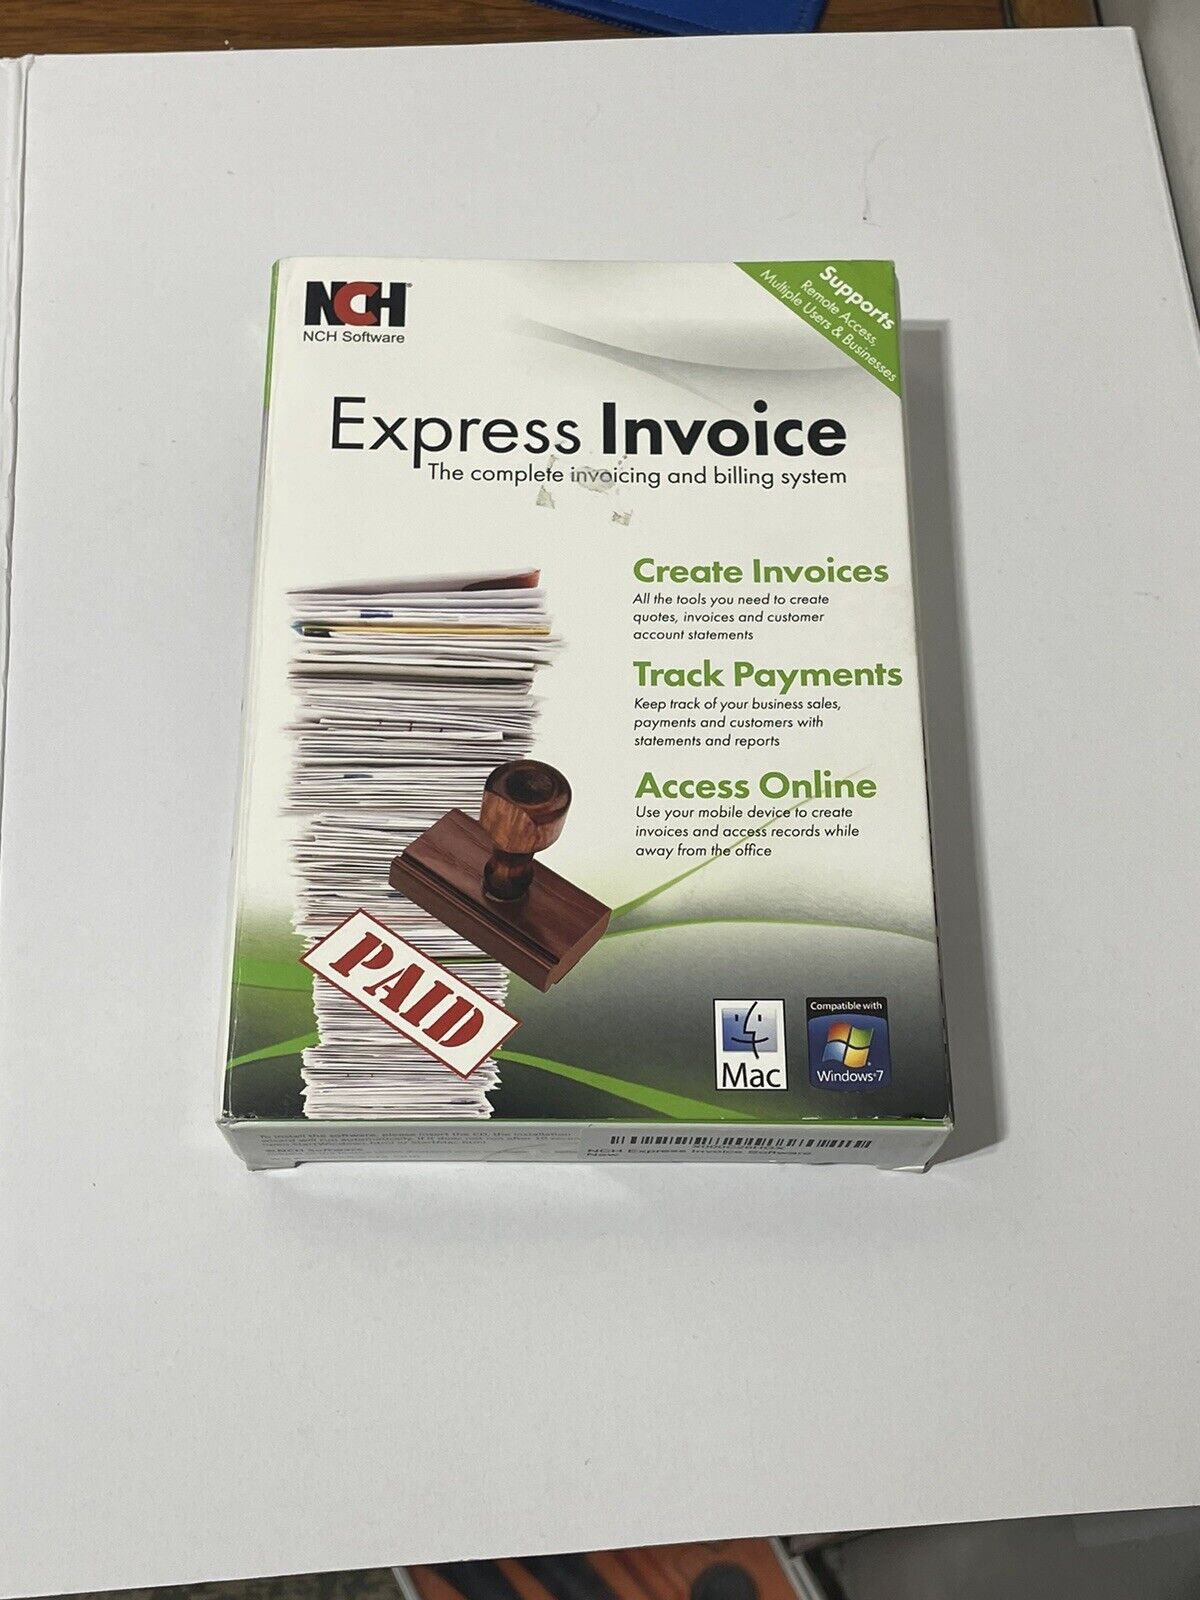 Express Invoice Invoicing Software Manage Invoices NCH - Older Version - NEW